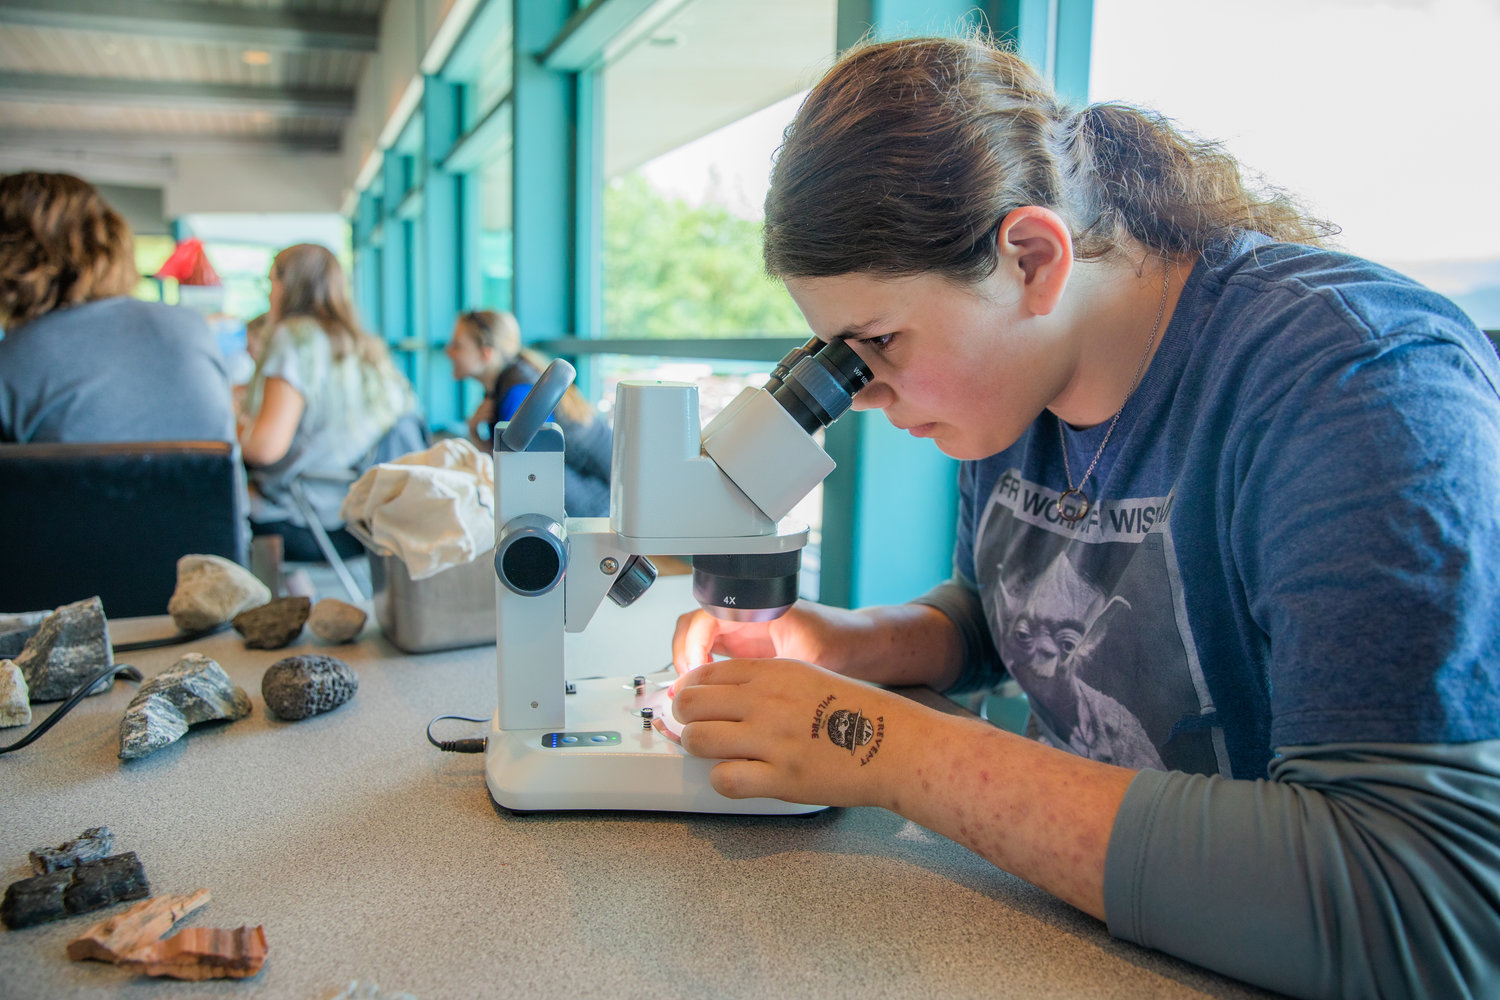 Paige Molyneux, 14, of Battle Ground, looks at rocks through a microscope during a GeoGirls project at the Mount St. Helens Science and Learning Center at Coldwater.